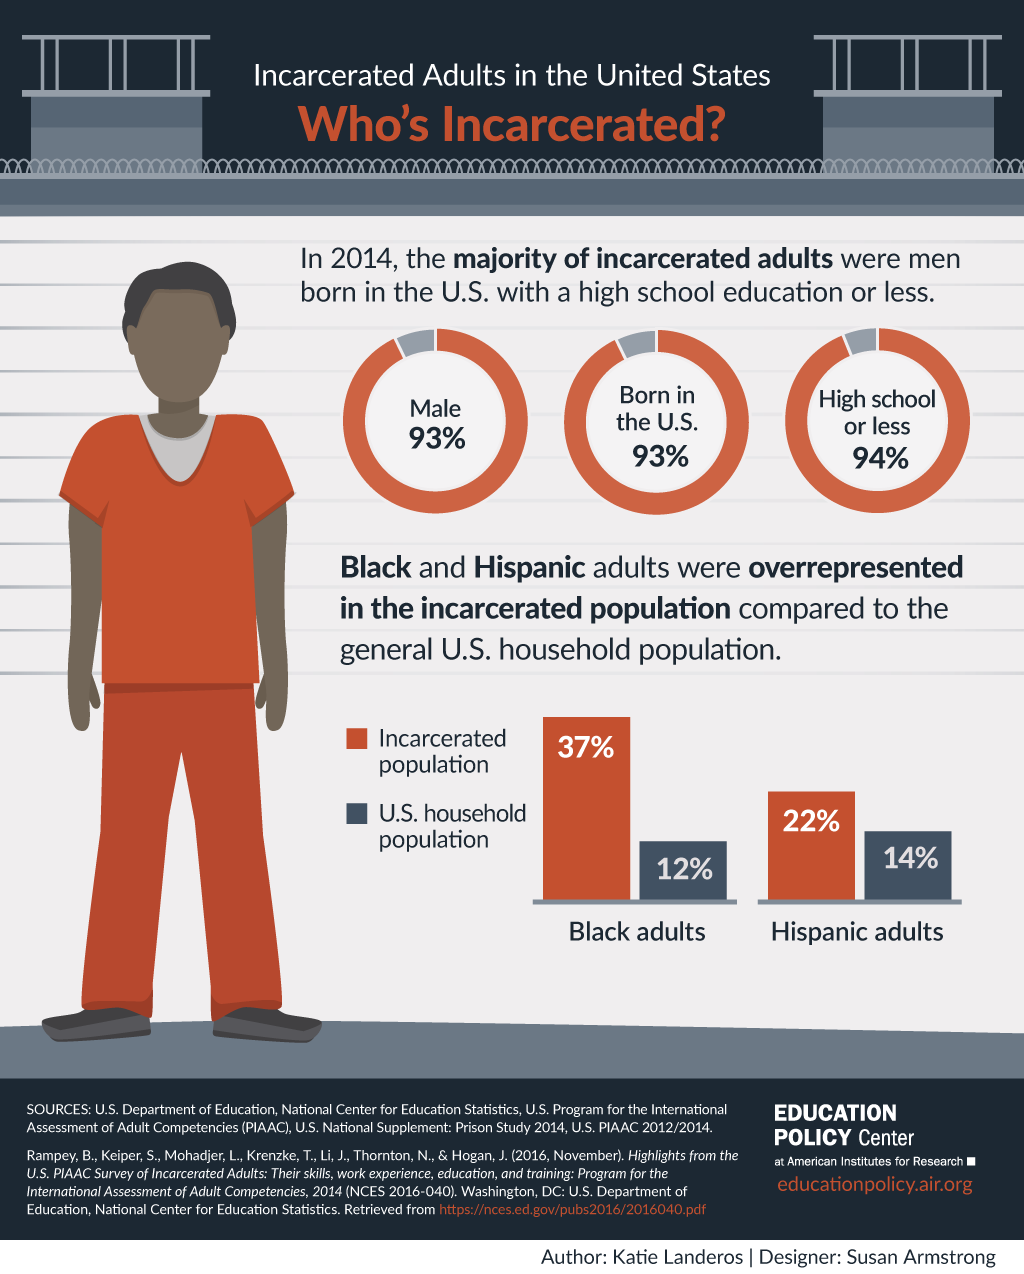 Incarcerated Adults in the United States: Who's Incarcerated? (Copy)